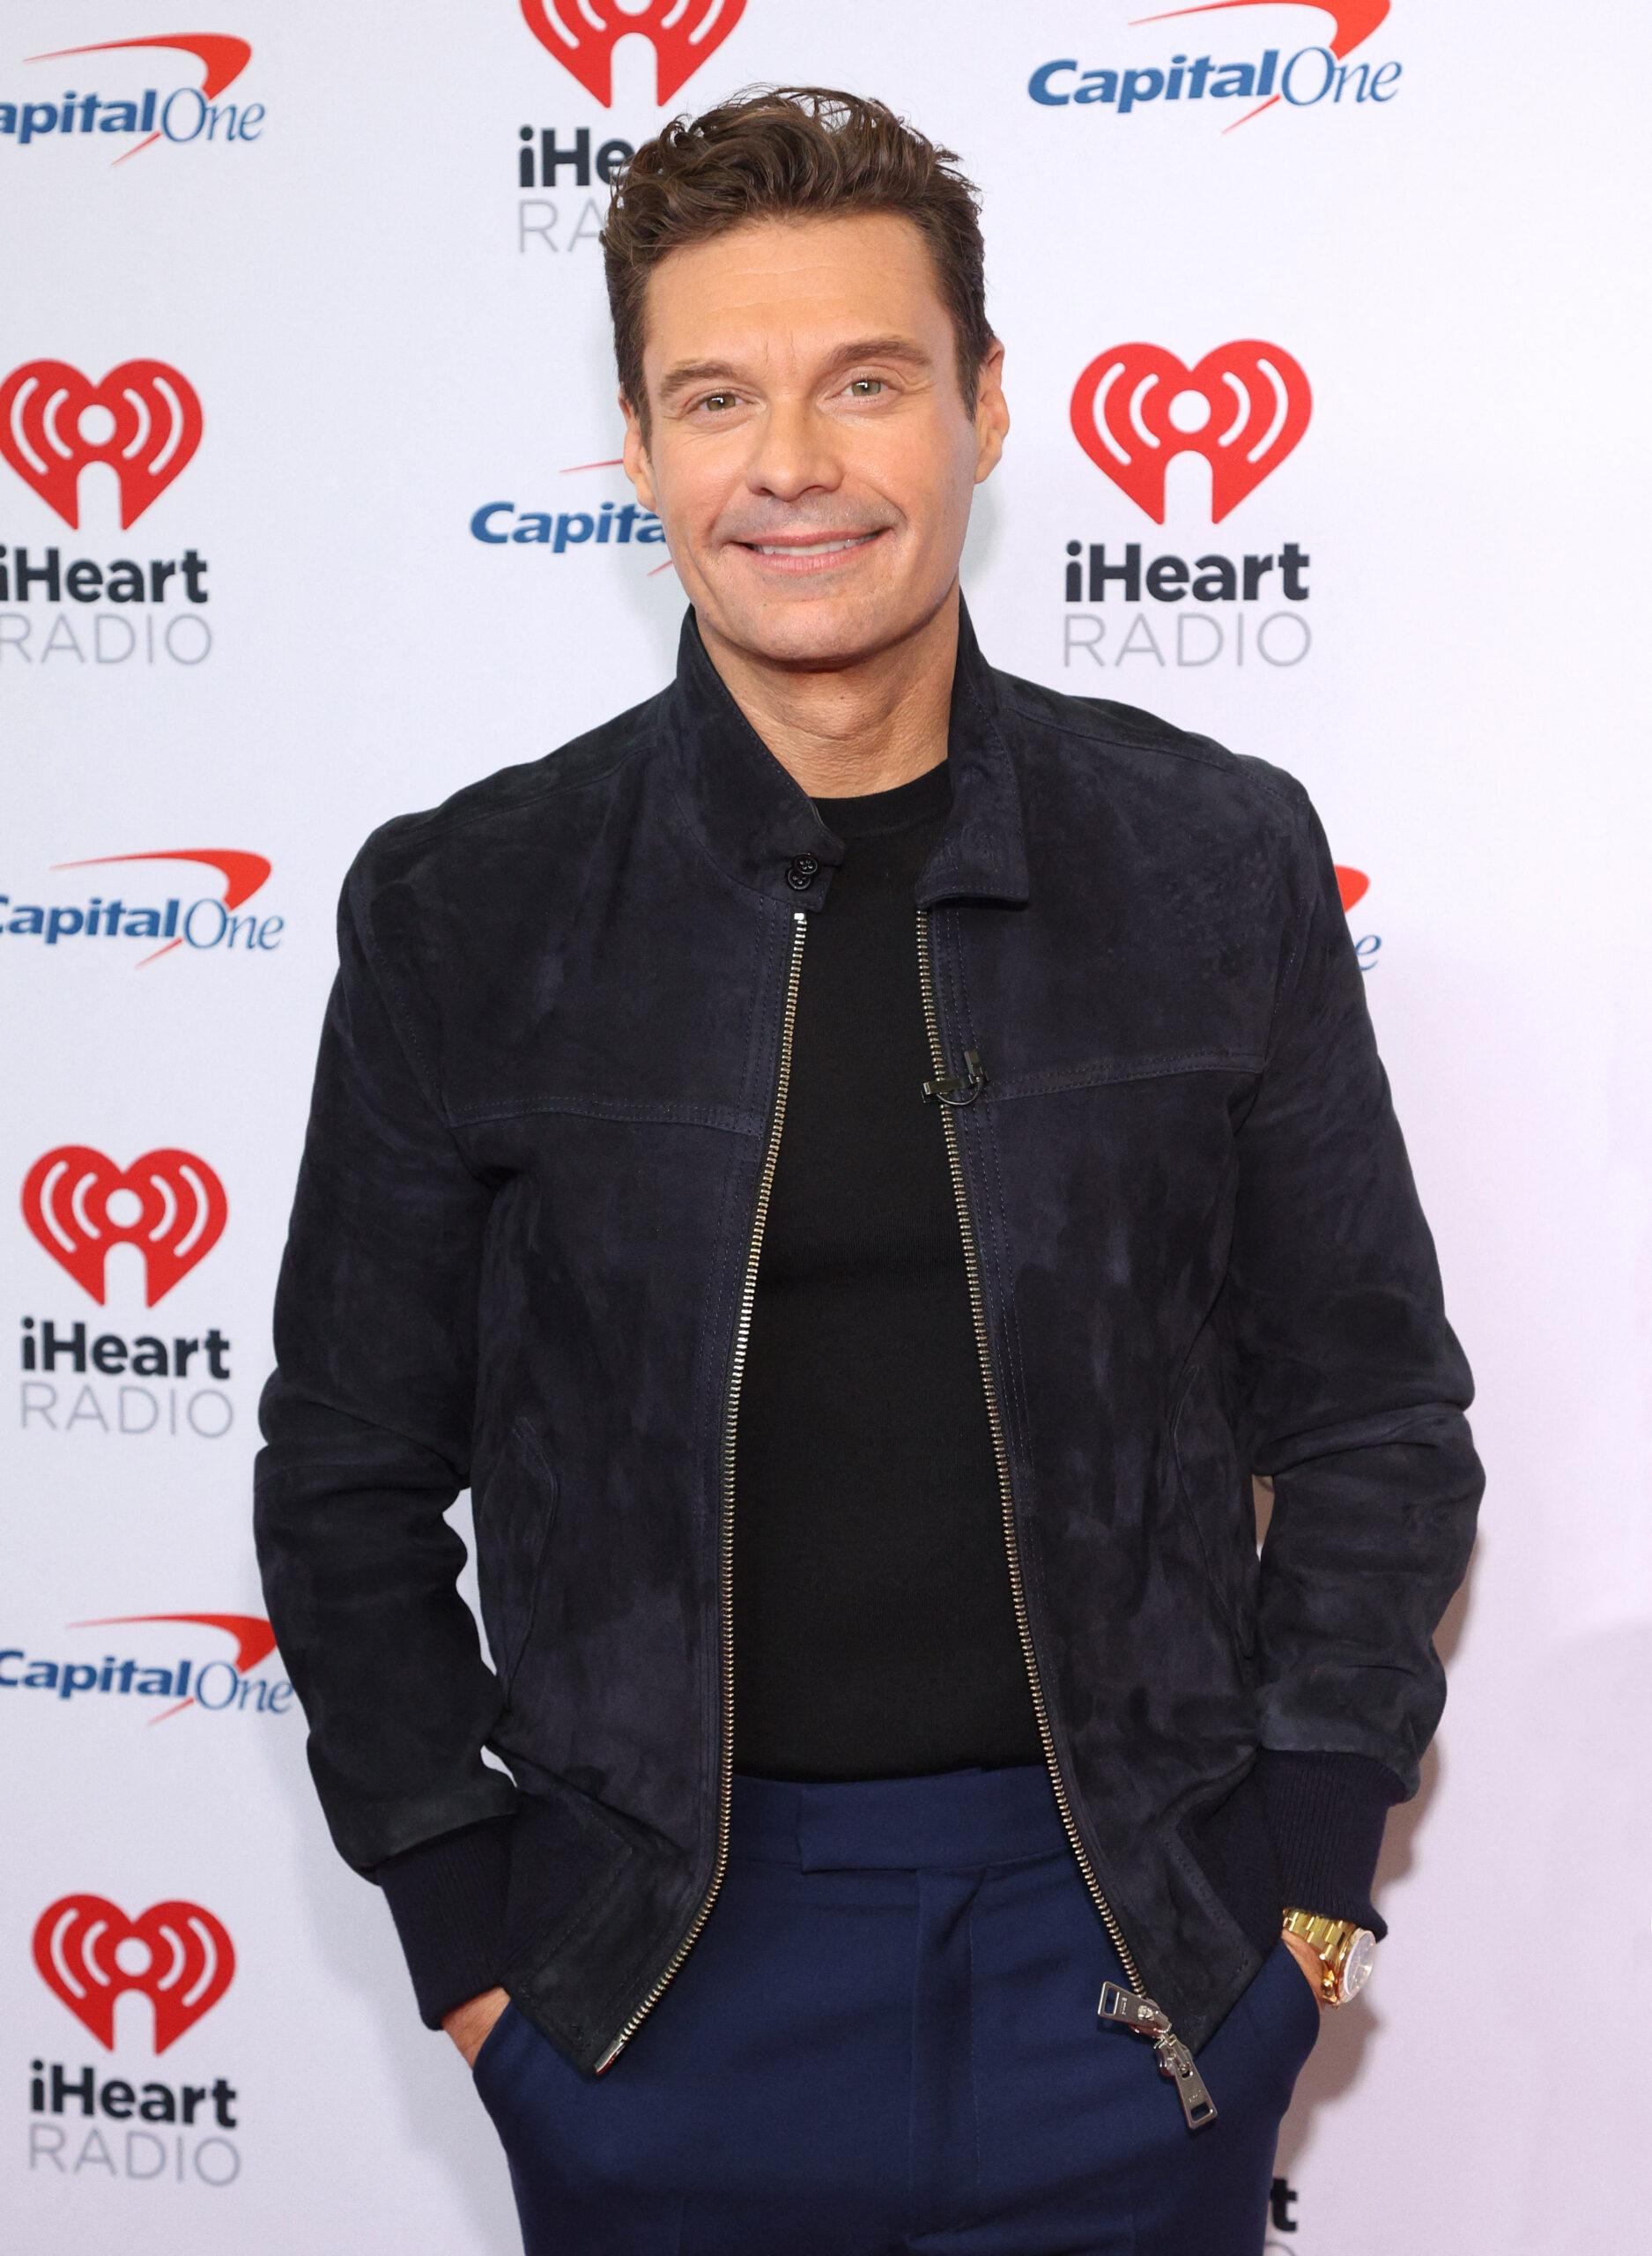 Ryan Seacrest Talks Hosting 'Wheel Of Fortune' As Pat Sajak's Days Are Limited